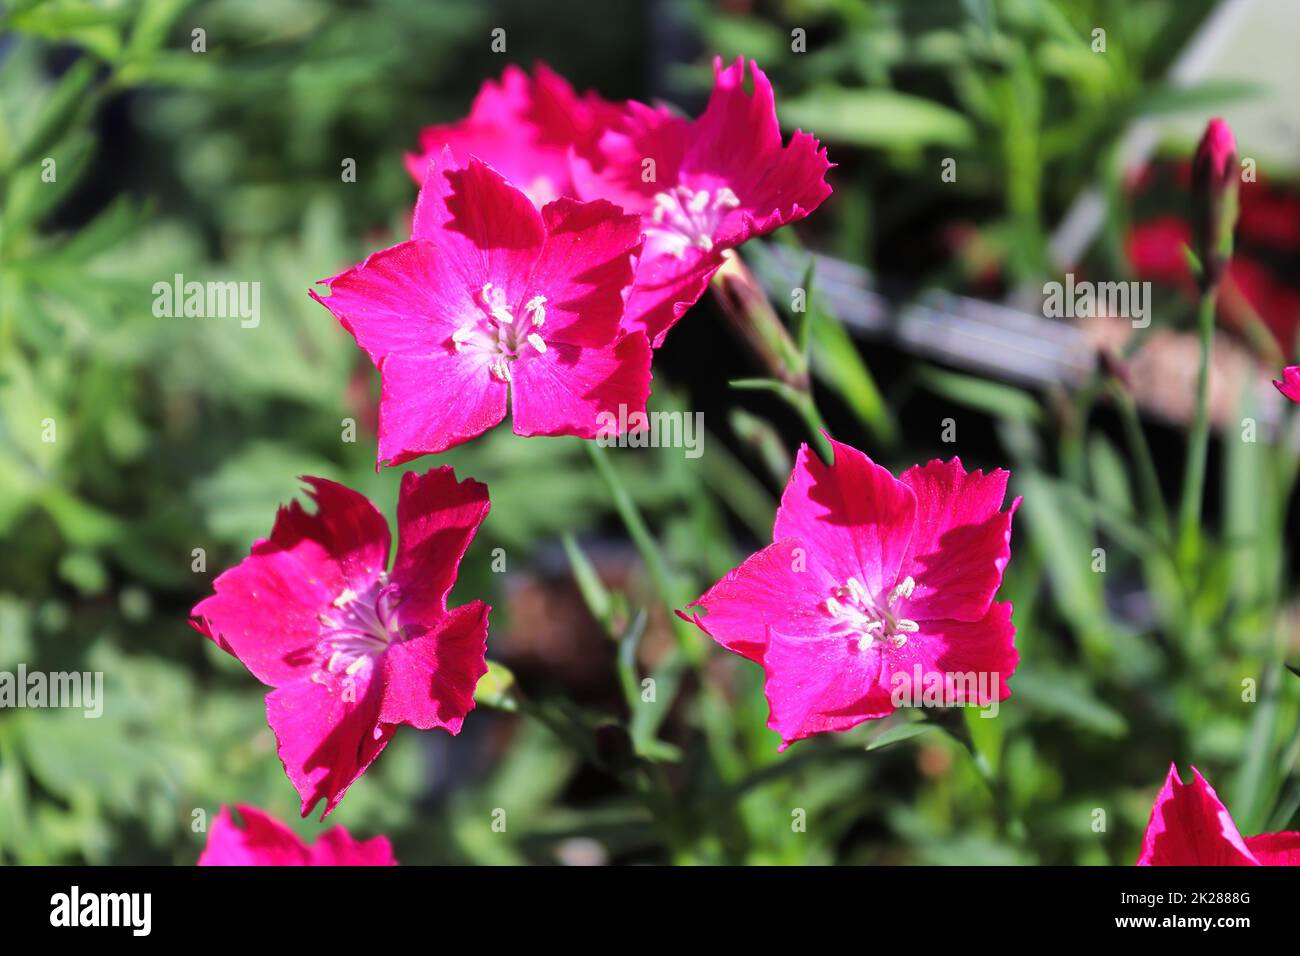 Closeup fo the pink flowers on a dianthus plant Stock Photo